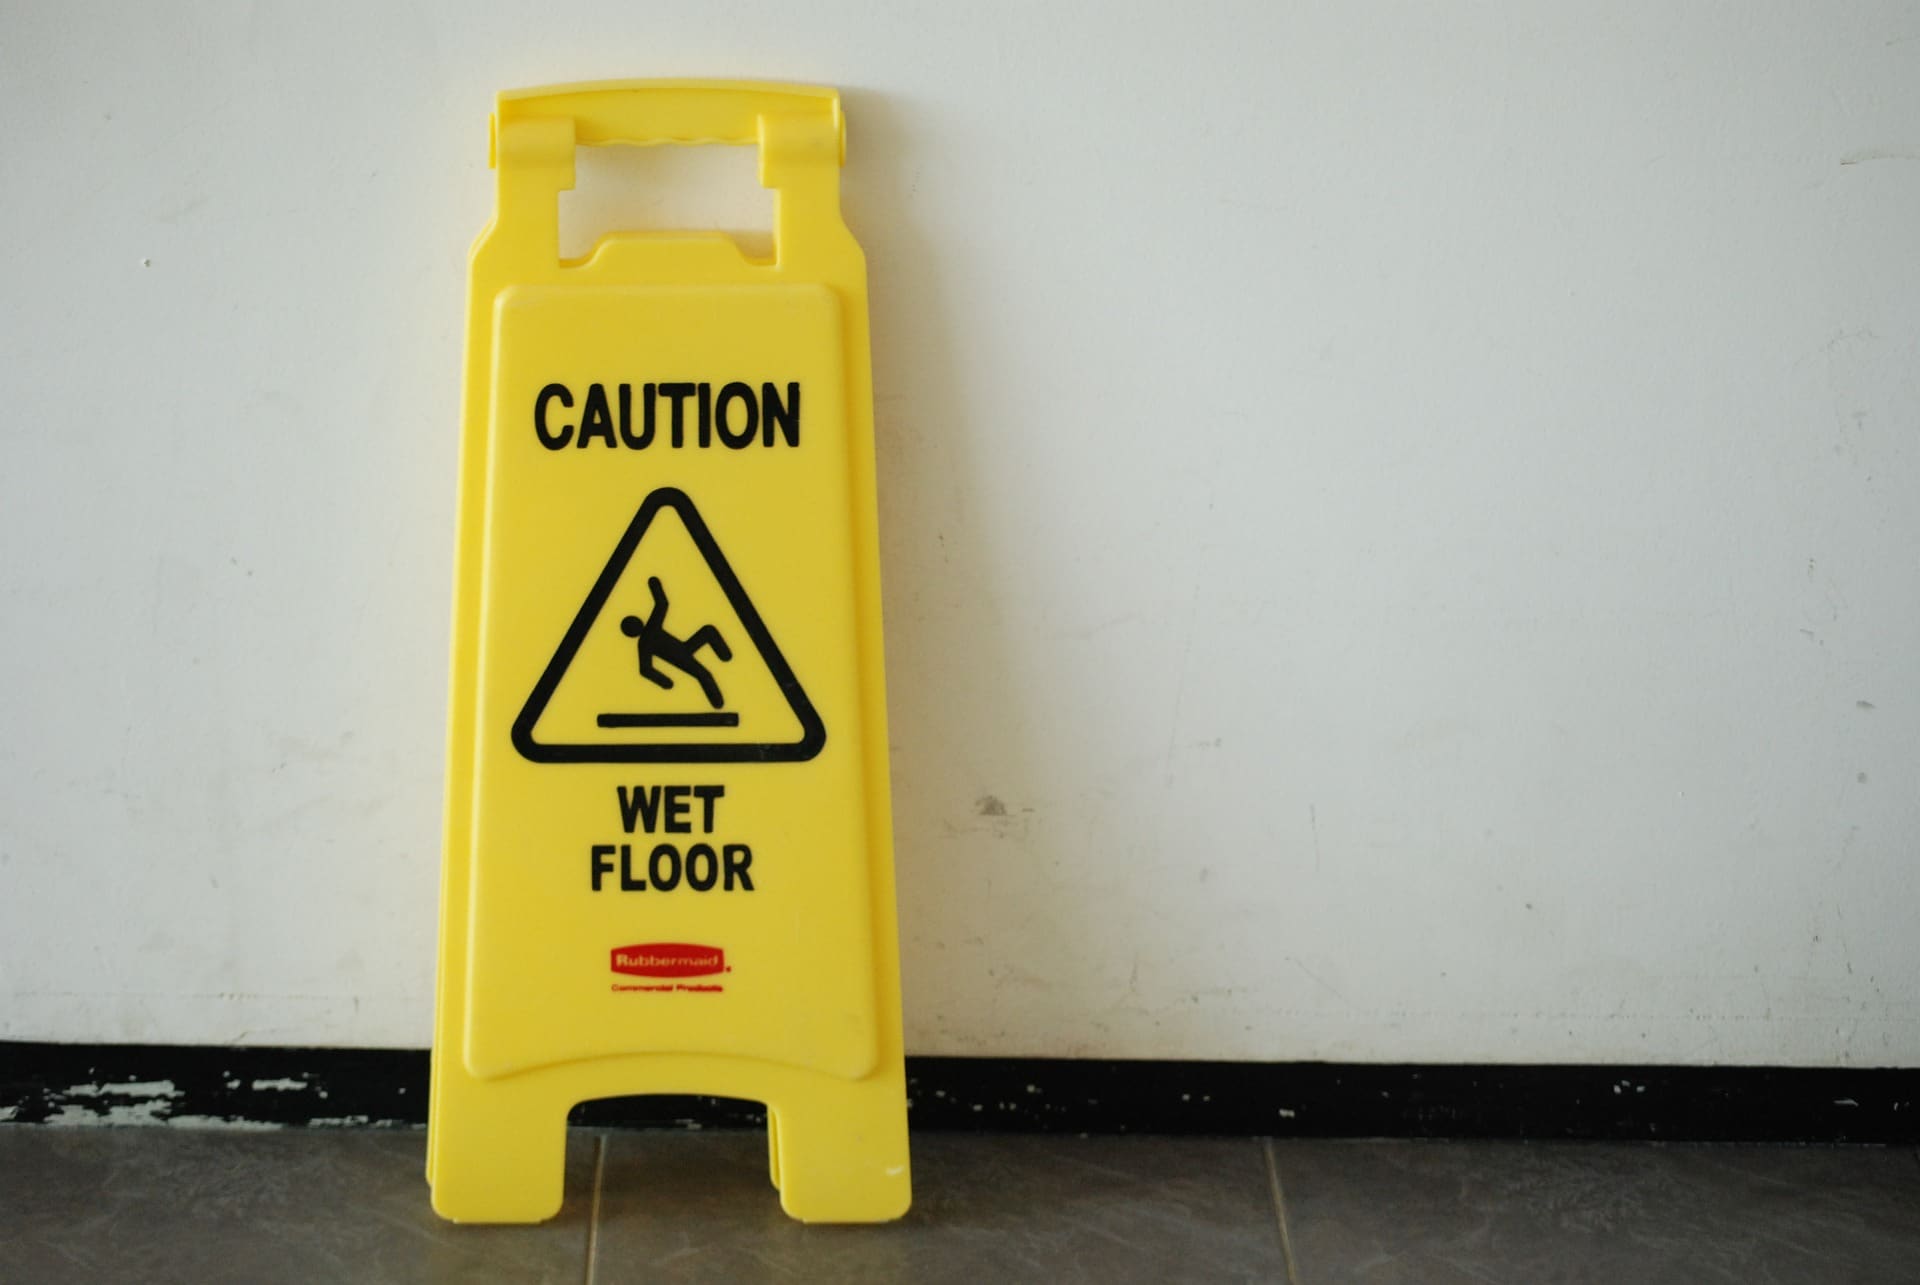 Safety sign with phrase CAUTION WET FLOOR and mop bucket on